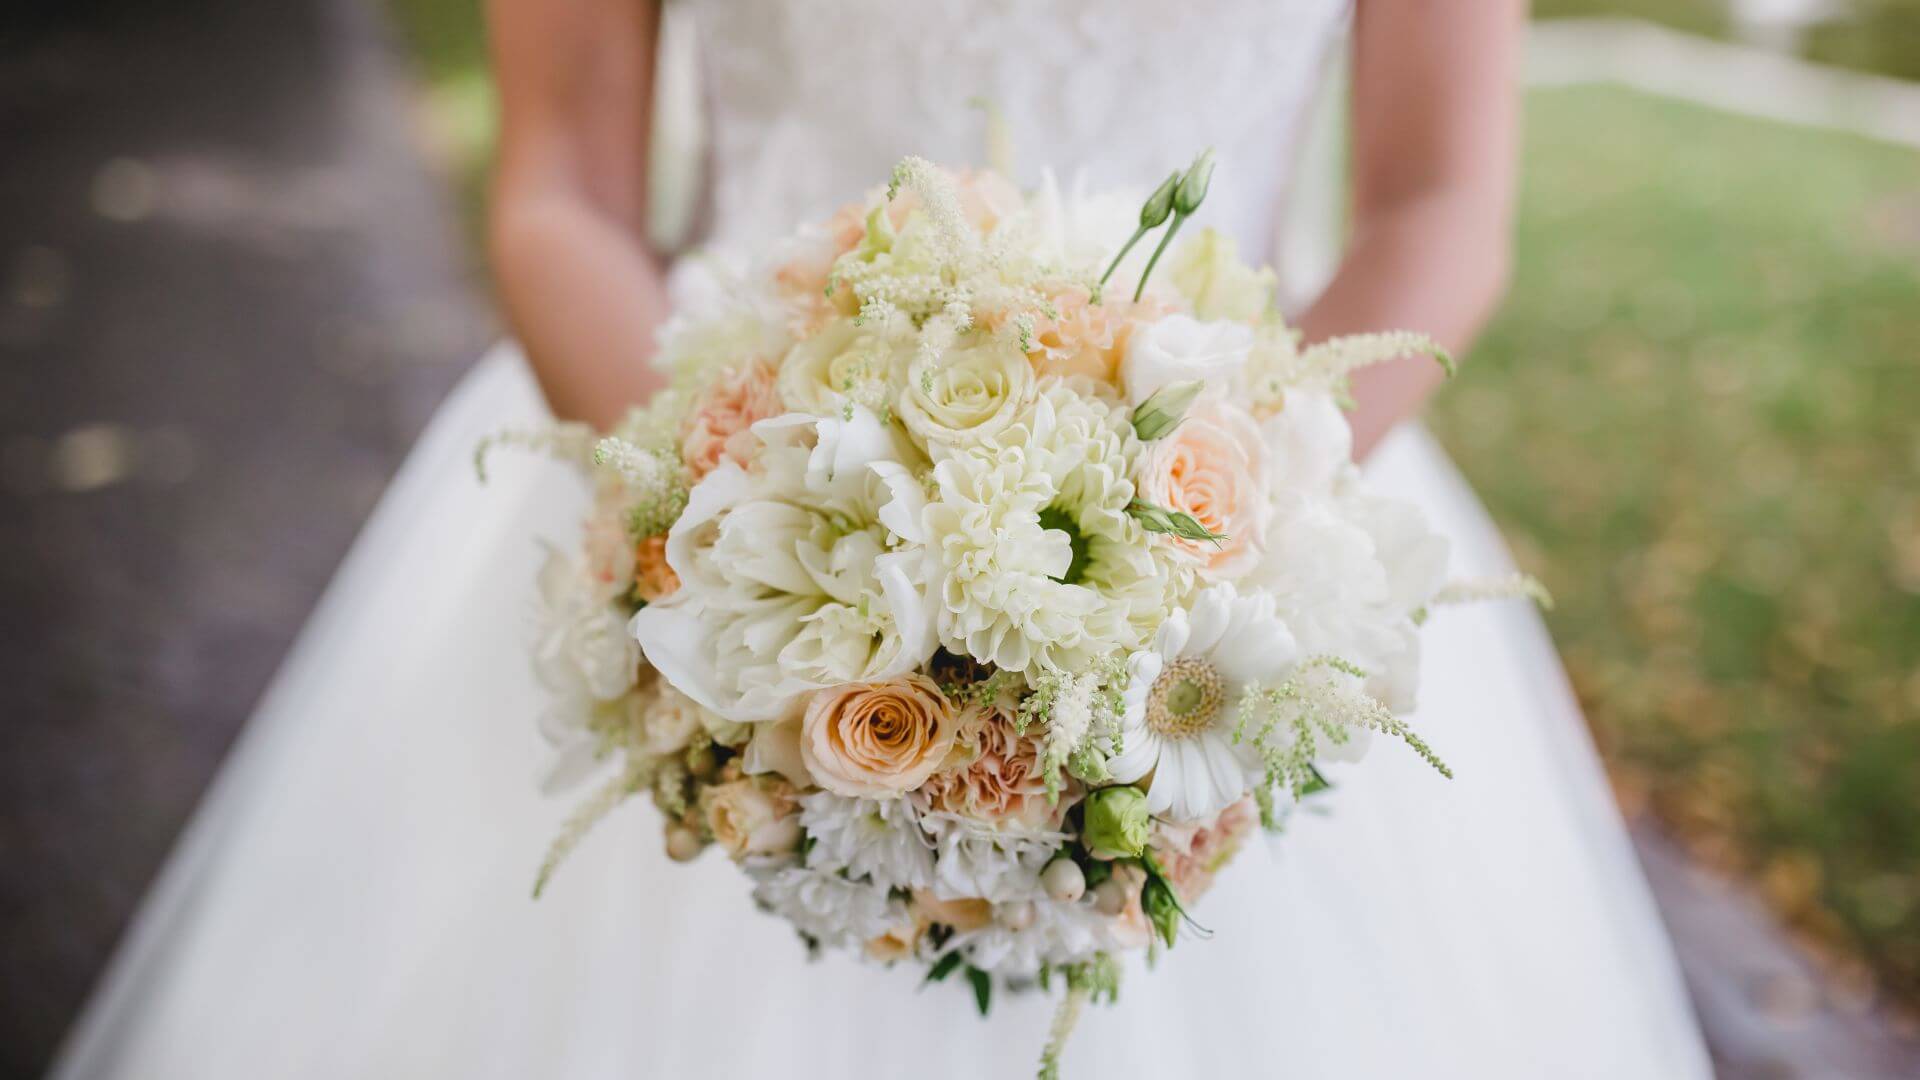 Bride in white dress standing while holding a bouquet of peach roses and other white flowers.